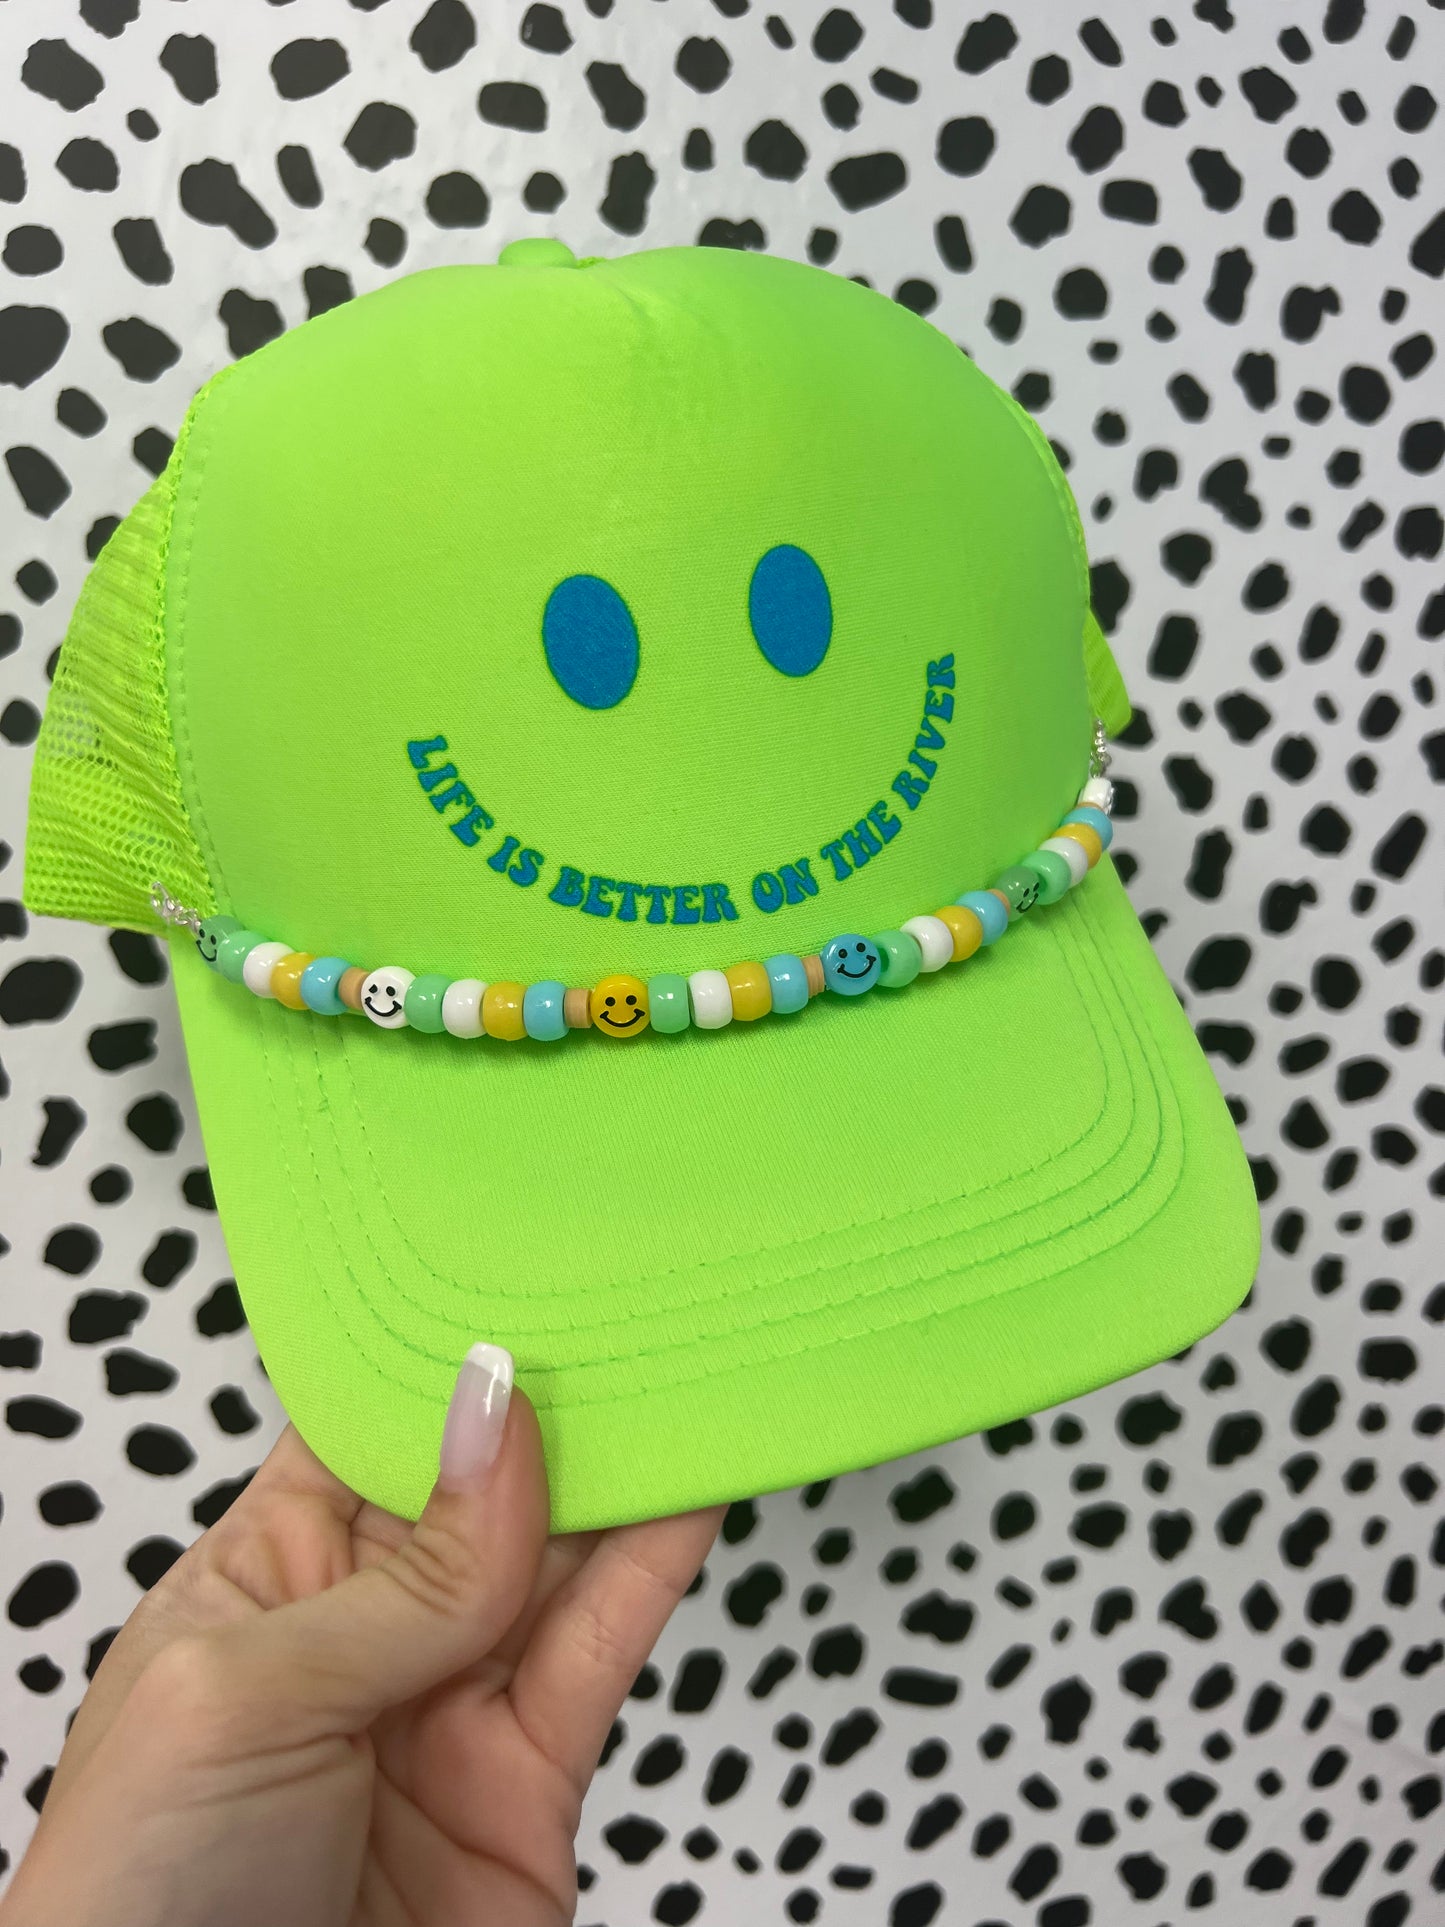 Life is better on the river | Trucker hat with charm